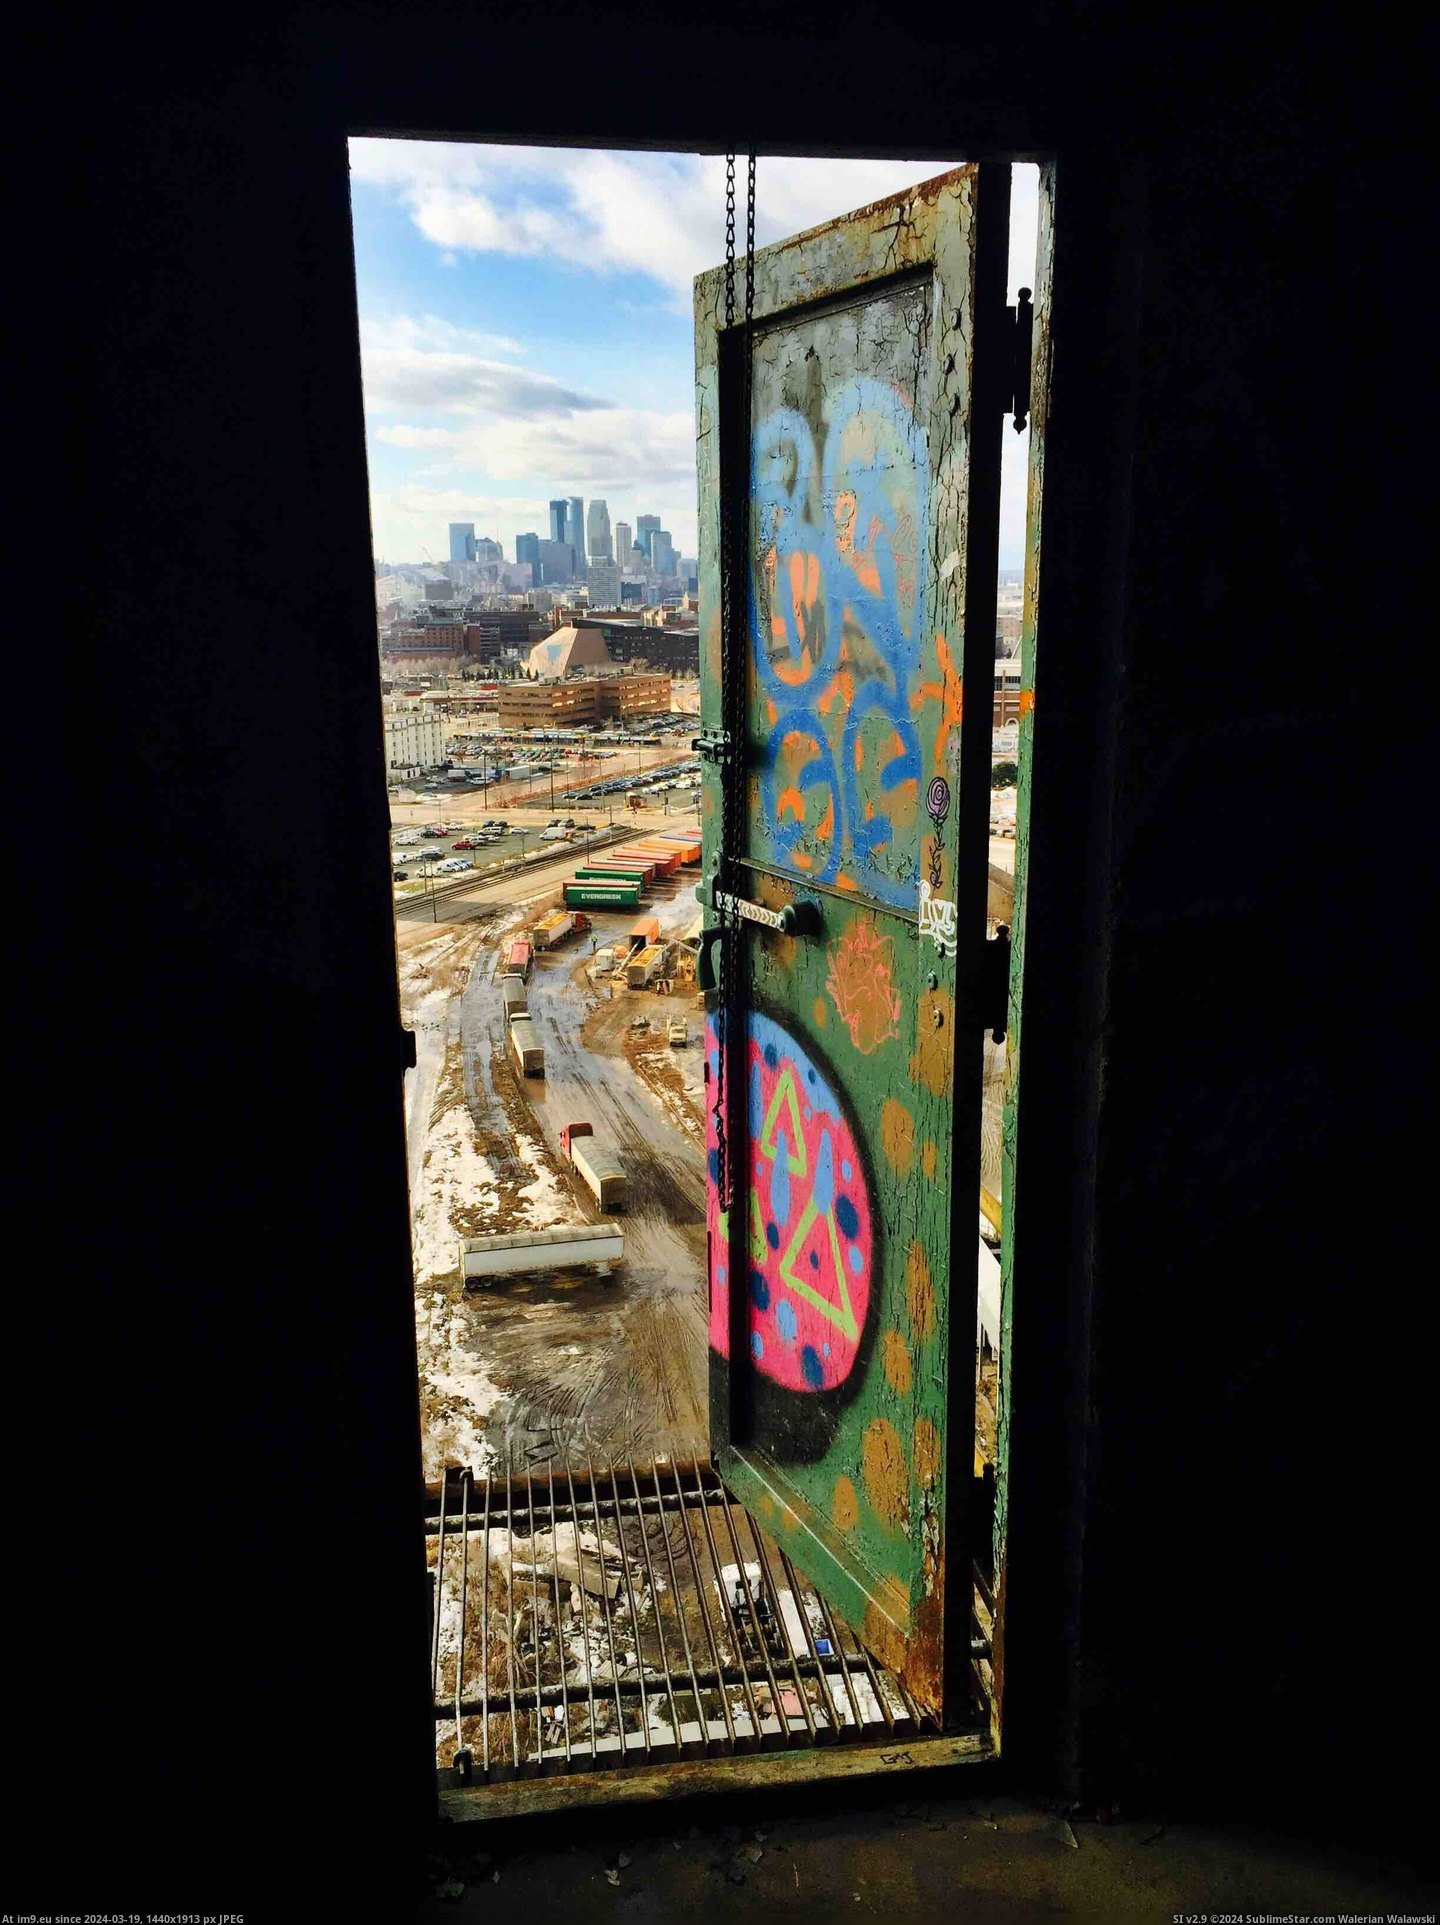 #Top #Abandoned #Exploring #Minneapolis #Floor #Mill [Pics] Minneapolis from the top floor of an abandoned mill we were exploring yesterday. Pic. (Image of album My r/PICS favs))